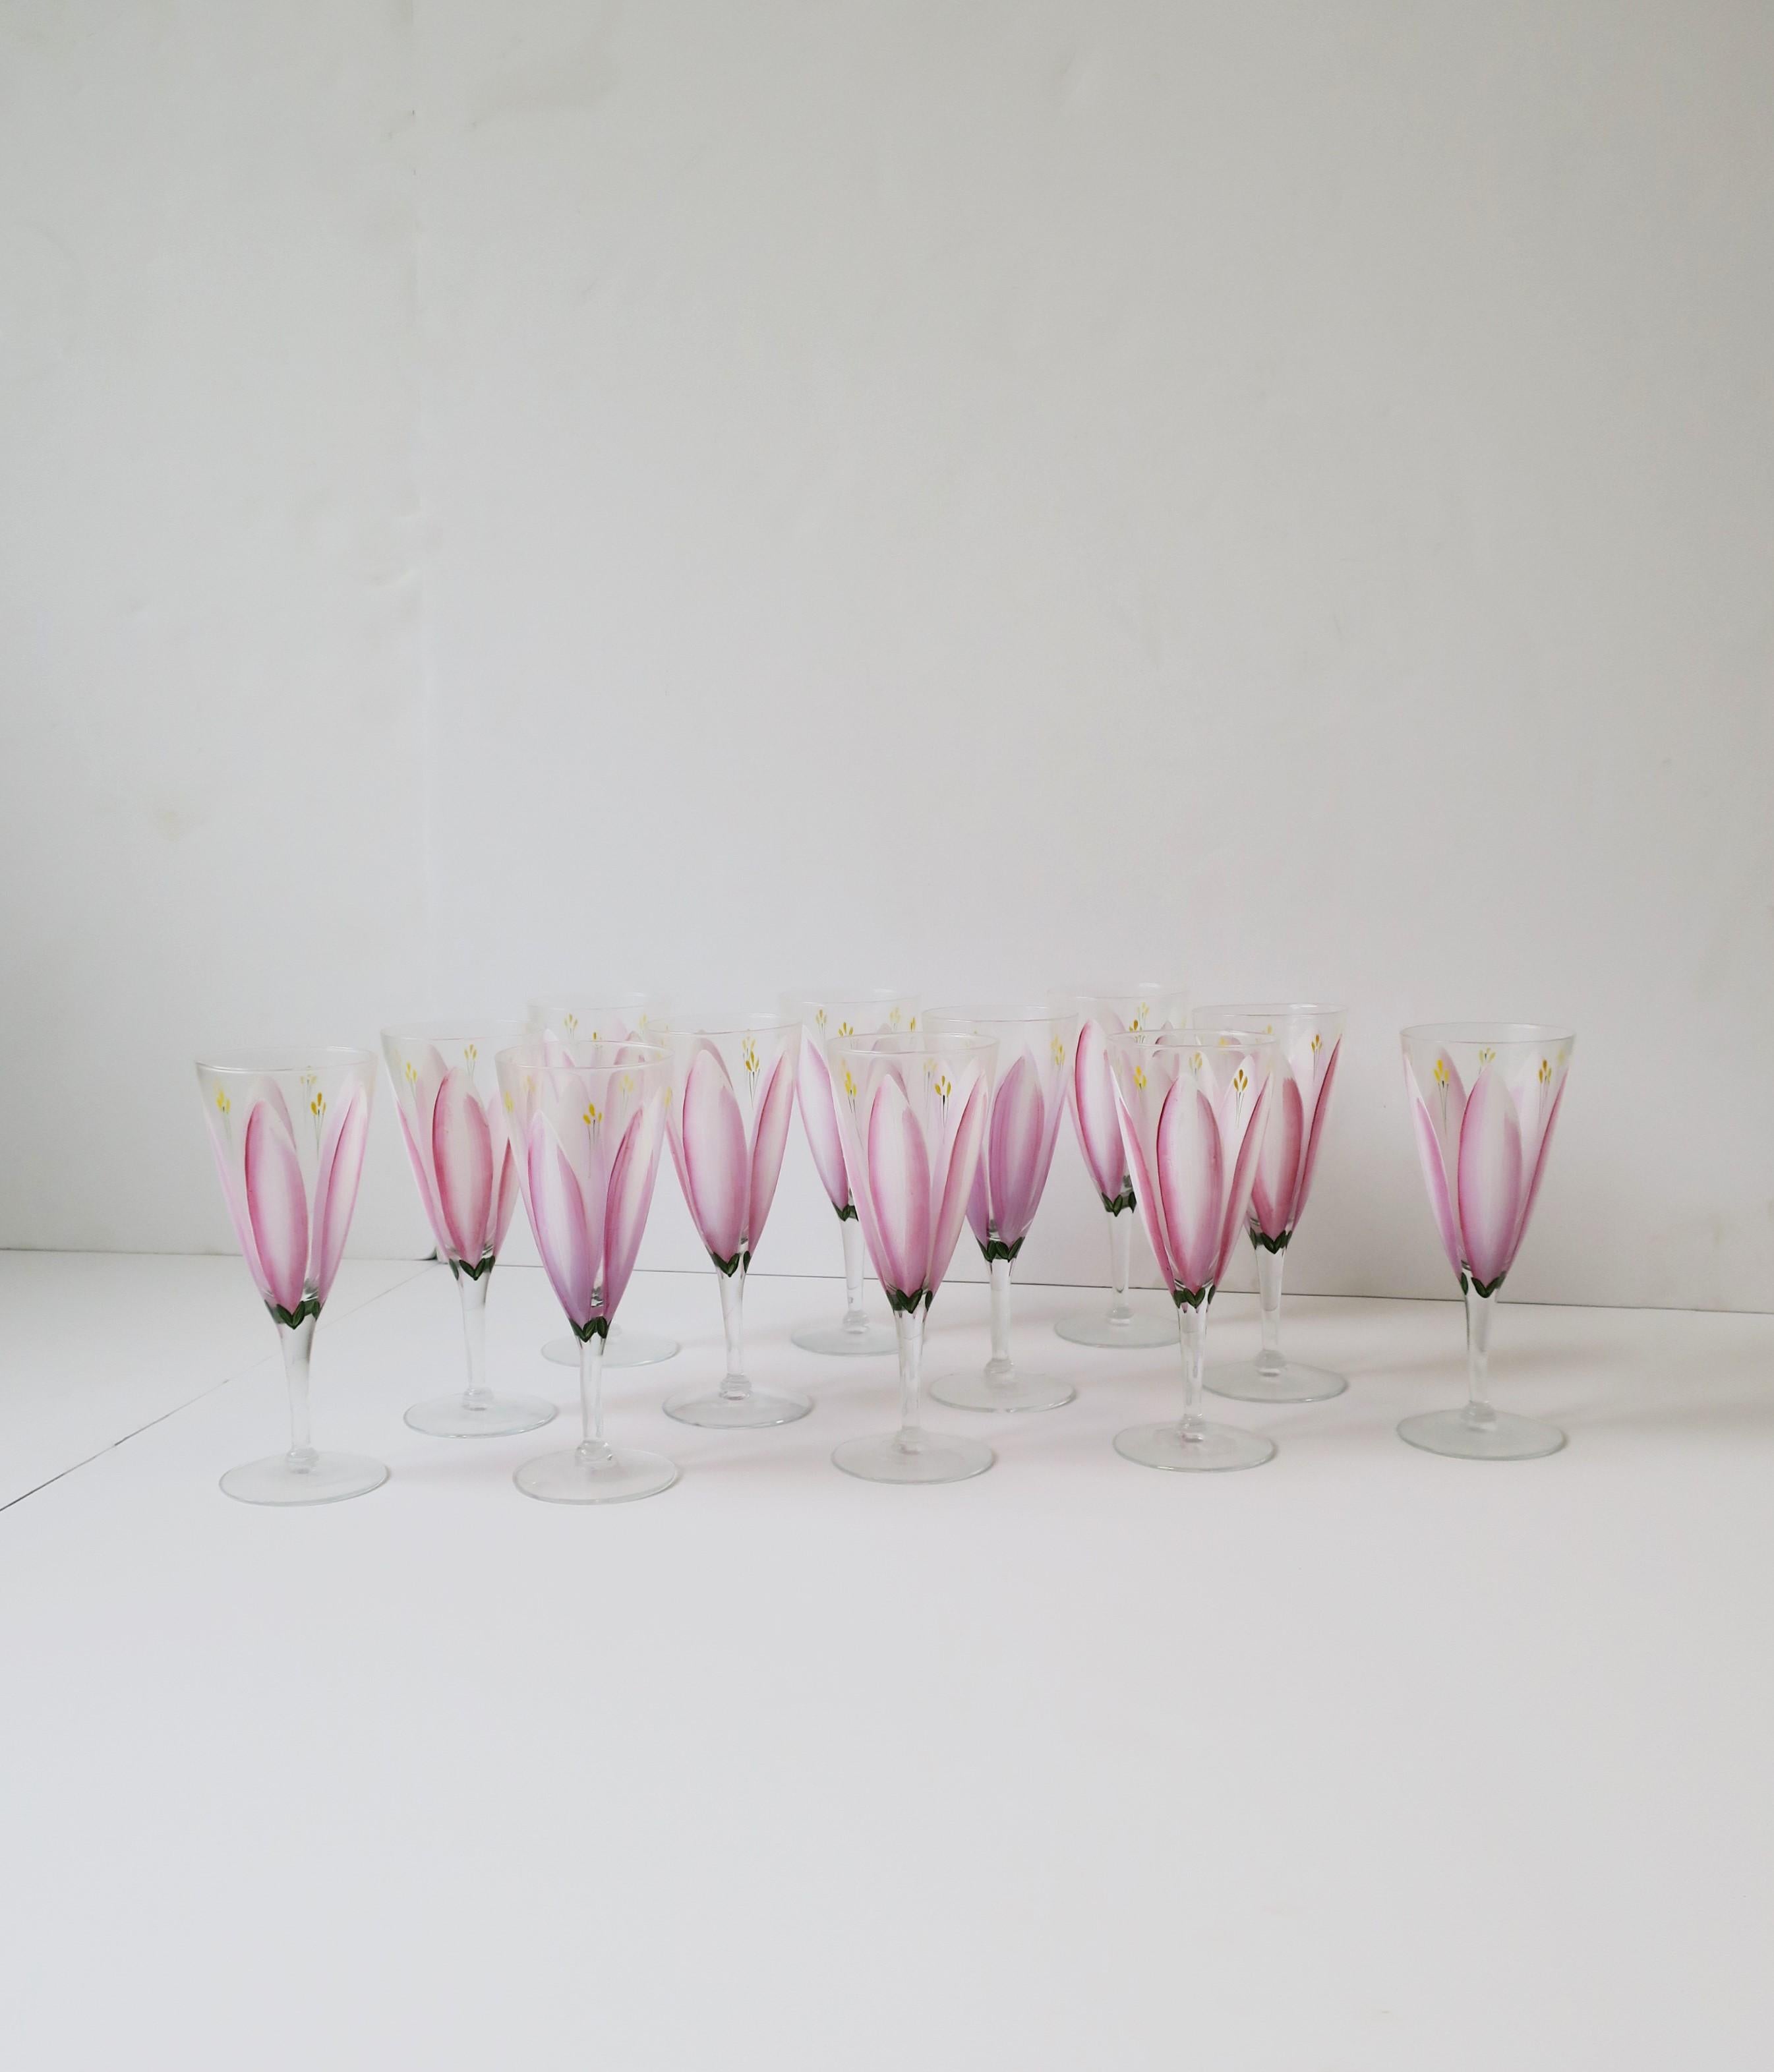 European Champagne Flutes Glasses with Pink Tulip Flower Design, Set of 12 For Sale